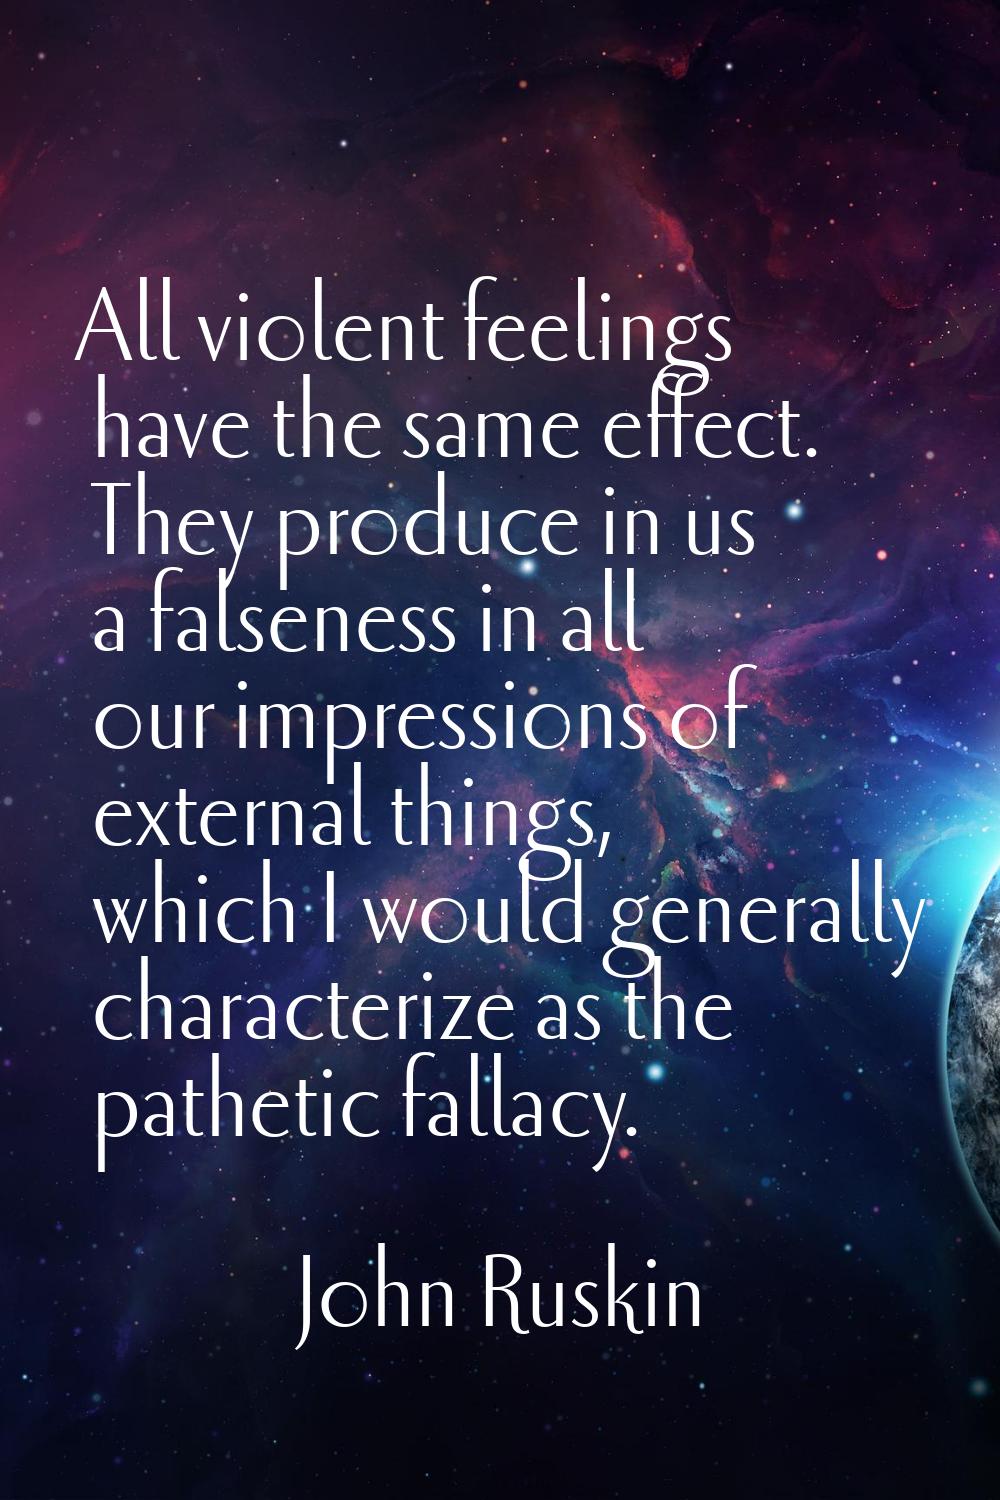 All violent feelings have the same effect. They produce in us a falseness in all our impressions of